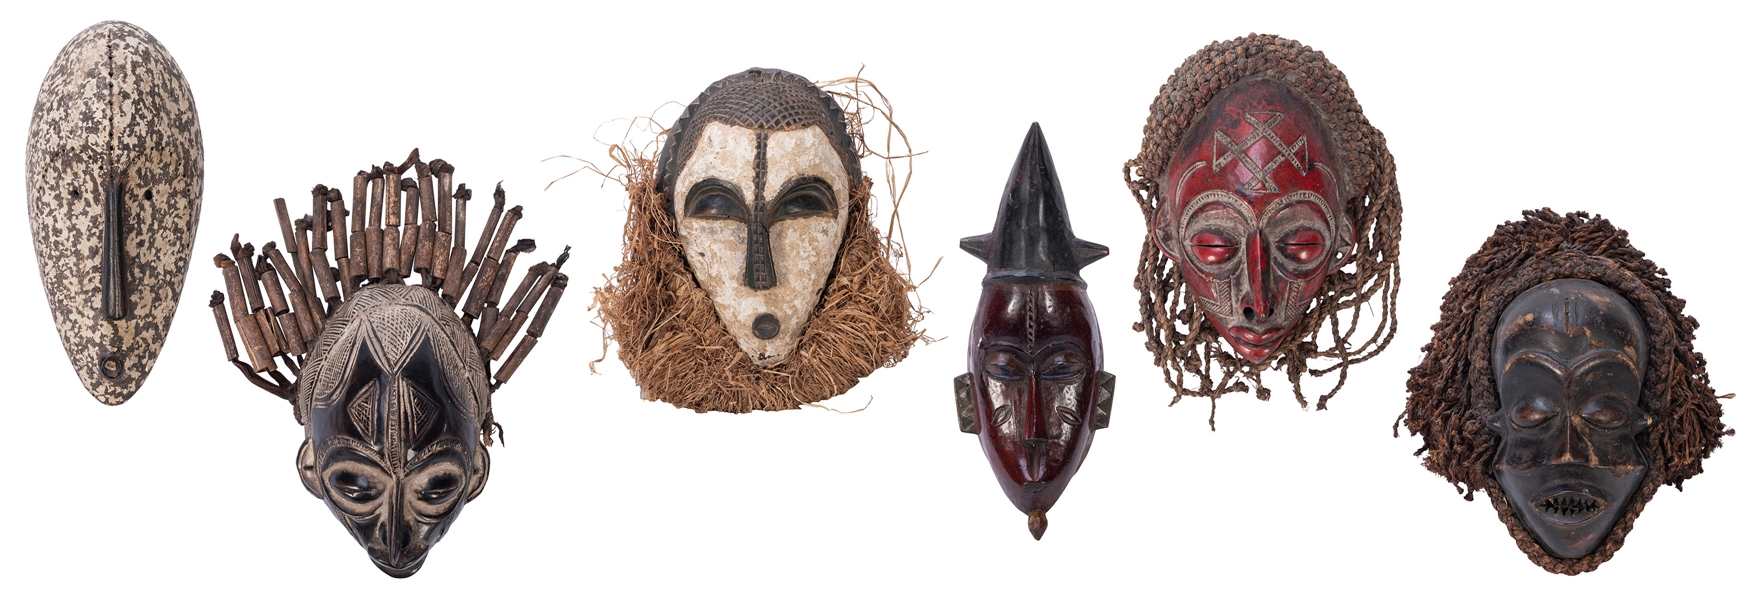  [AFRICAN] Six Tribal Masks. Carved wood. Probably made for ...